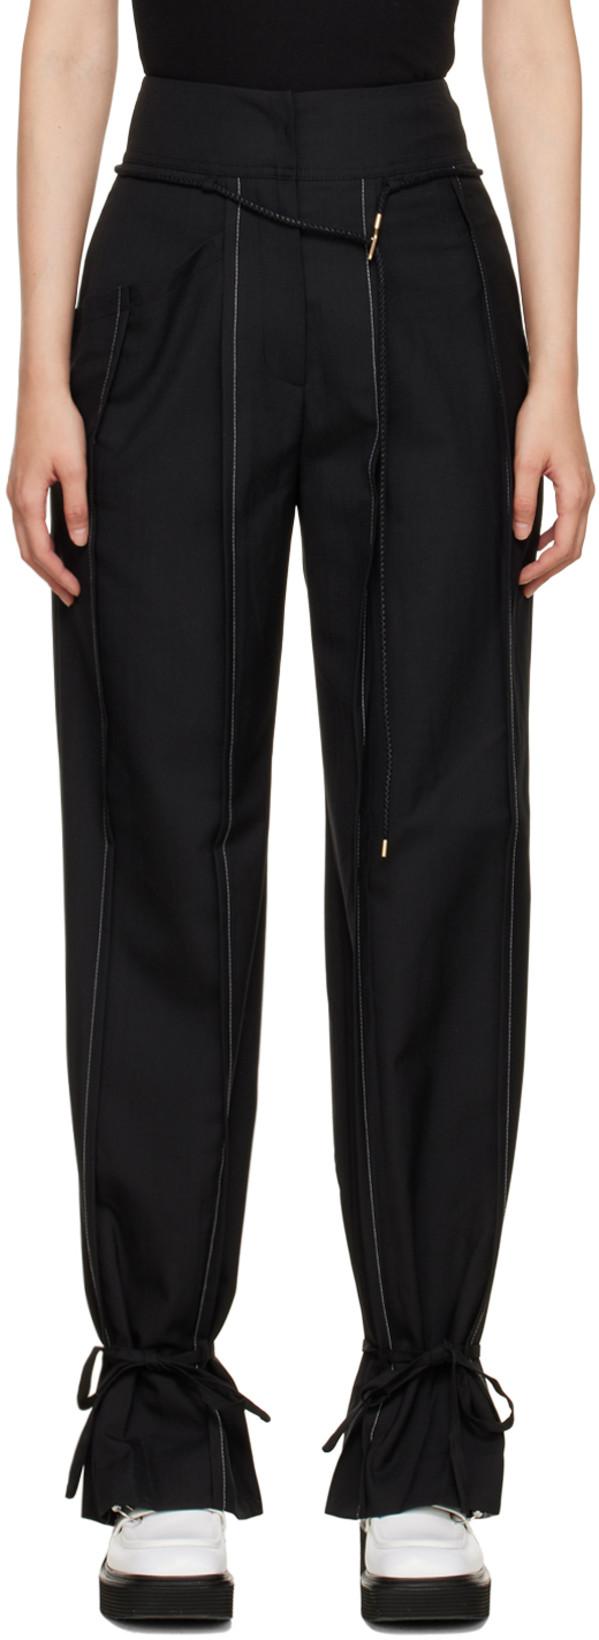 SSENSE Exclusive Black Katina Trousers by ANDERSSON BELL